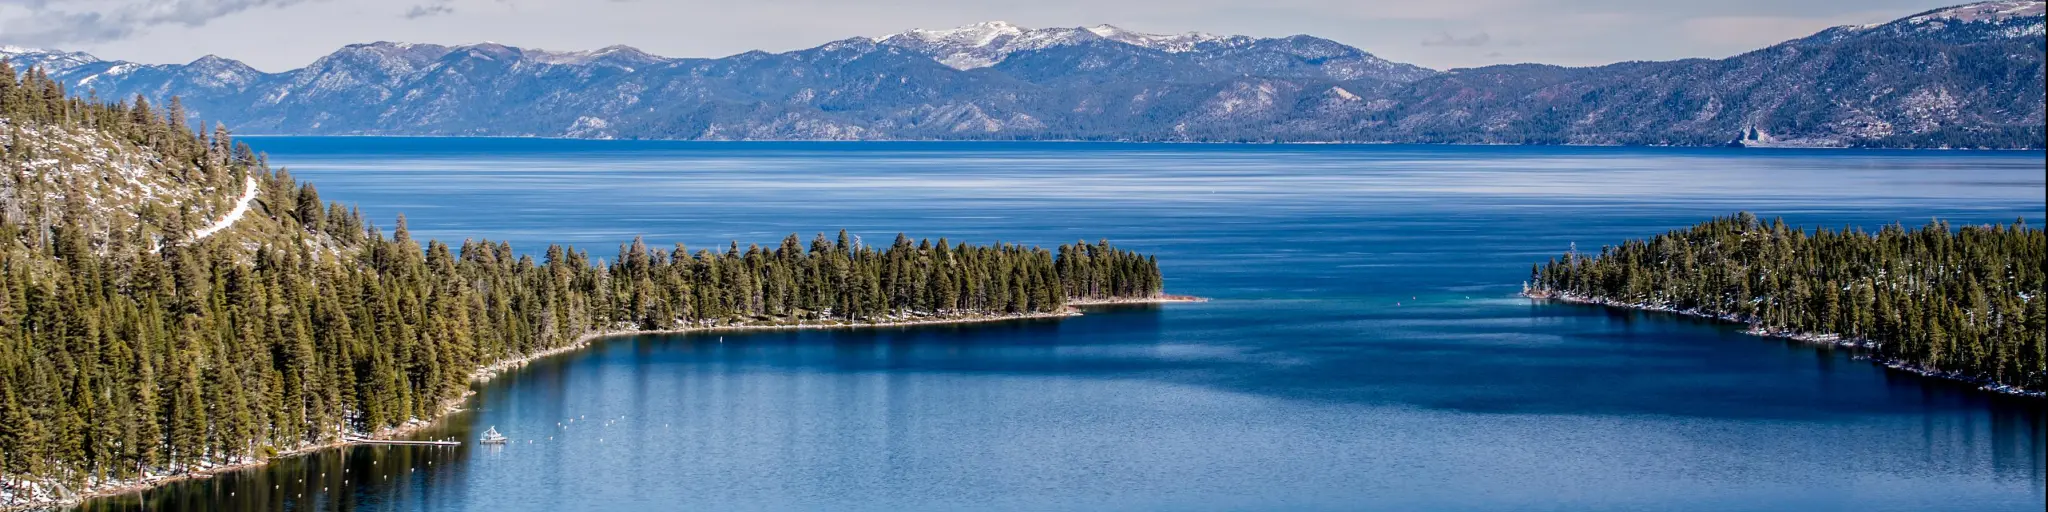 View of Lake Tahoe from near Emerald Bay, California, USA, including Fannette Island, in the end of the winter of 2018, covered with a very shallow layer of snow.